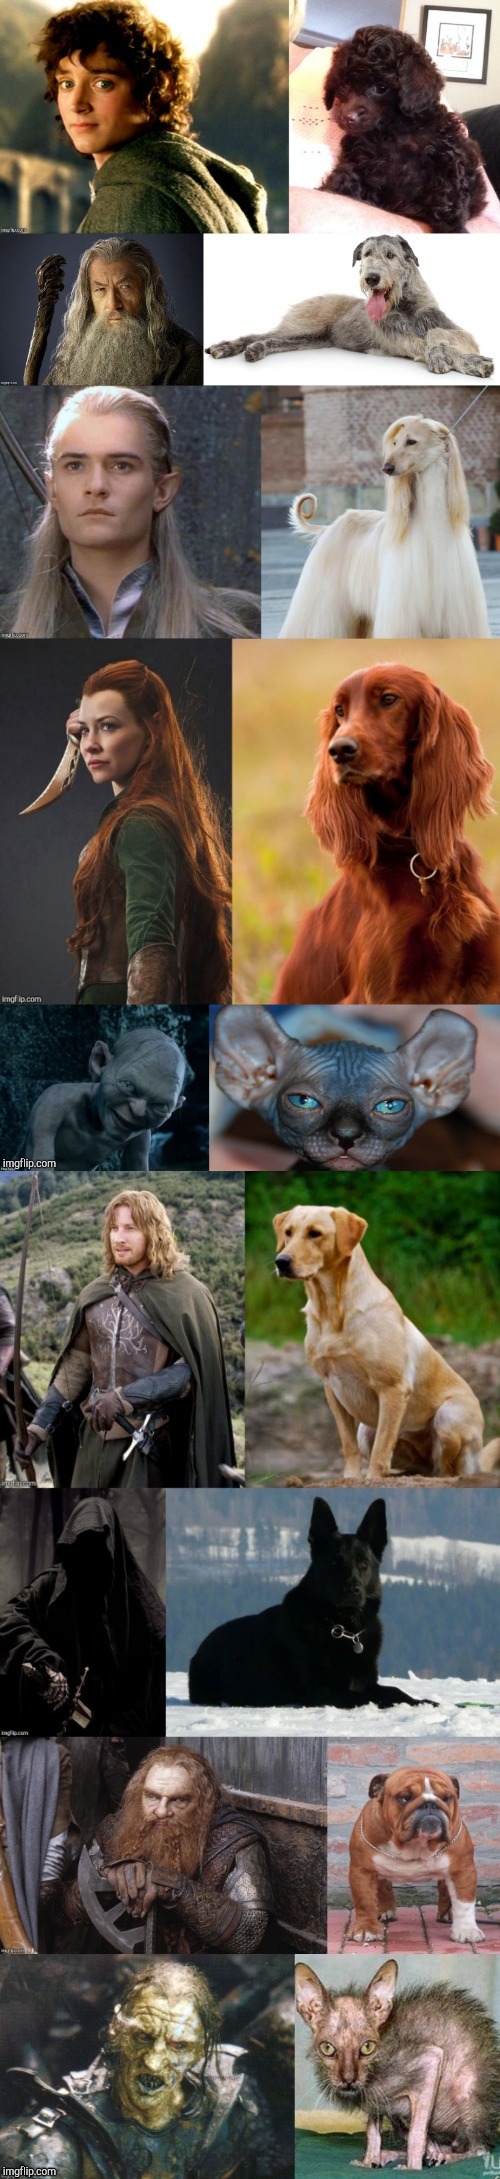 Lord of the Pets | image tagged in lord of the rings,the hobbit,dogs,doppelgnger,pets,funny | made w/ Imgflip meme maker